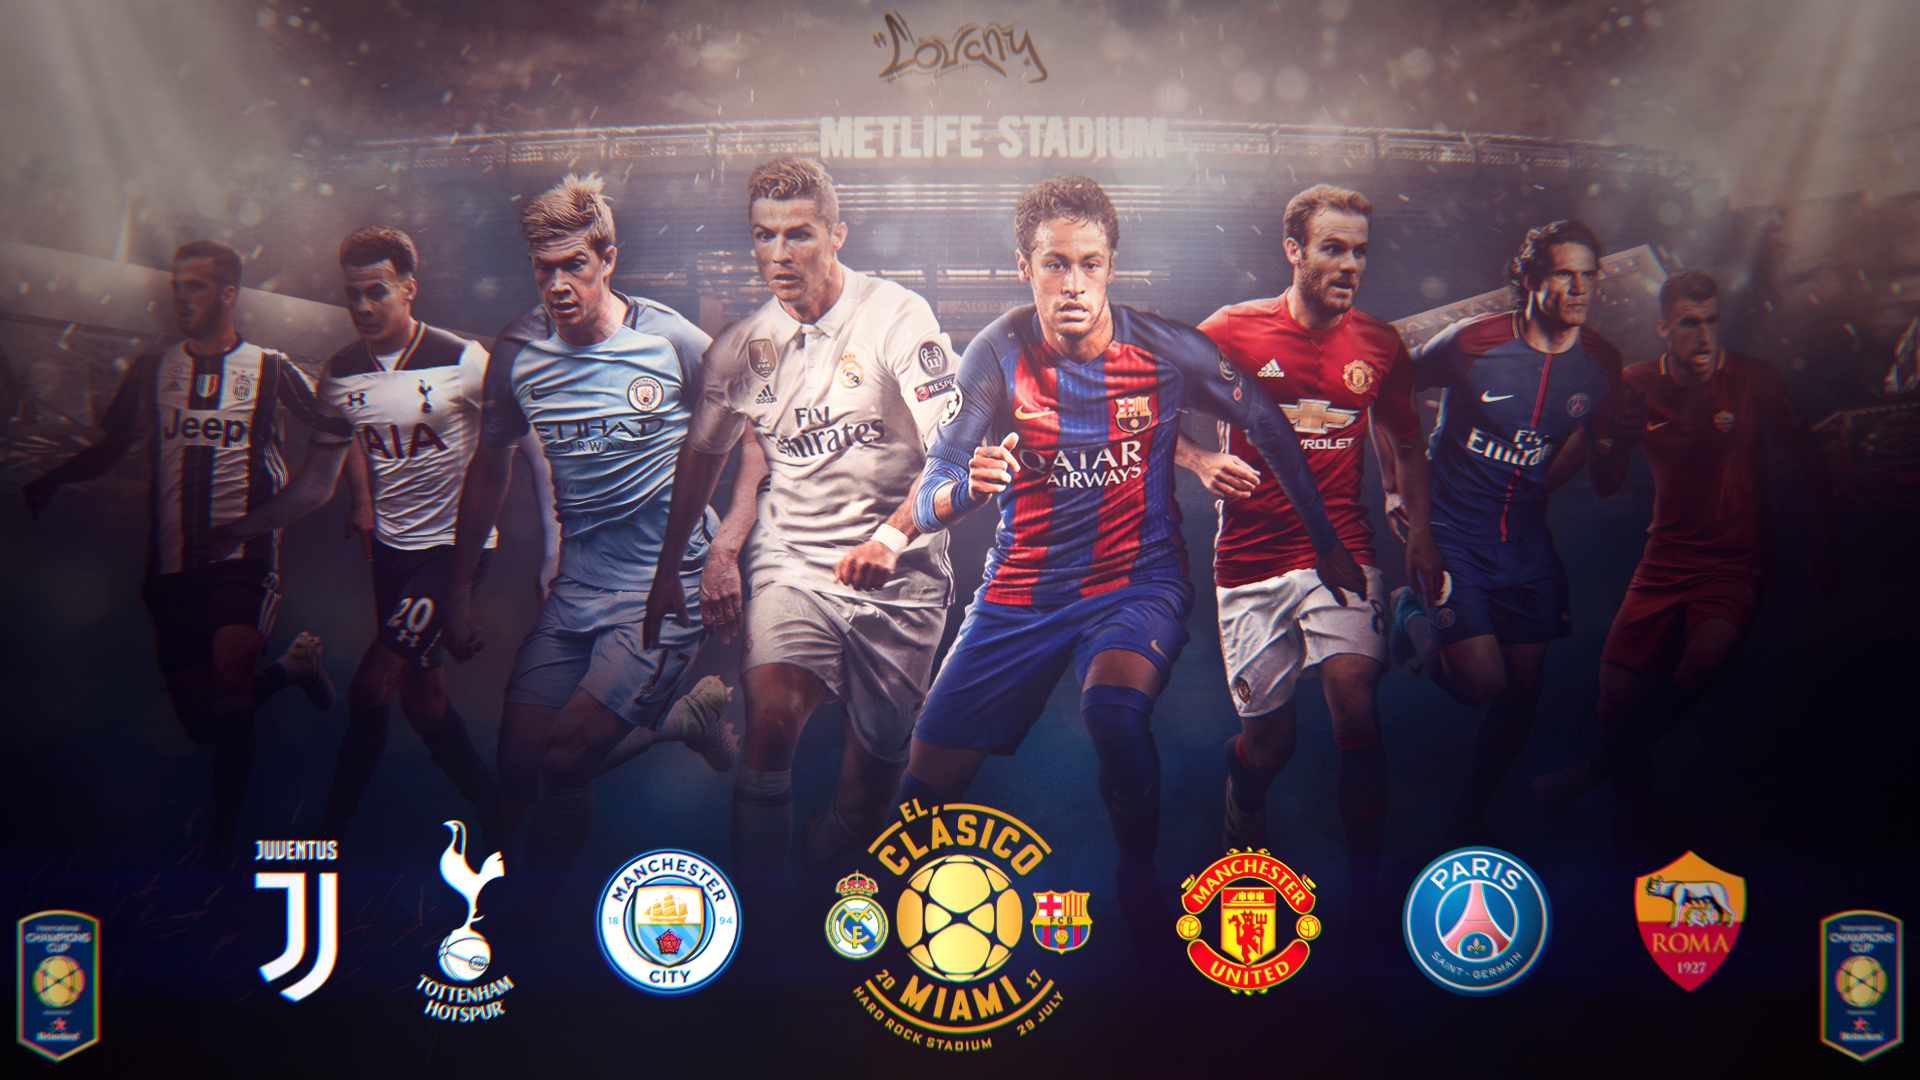 International Champions Cup by CouqnyDesigns on DeviantArt